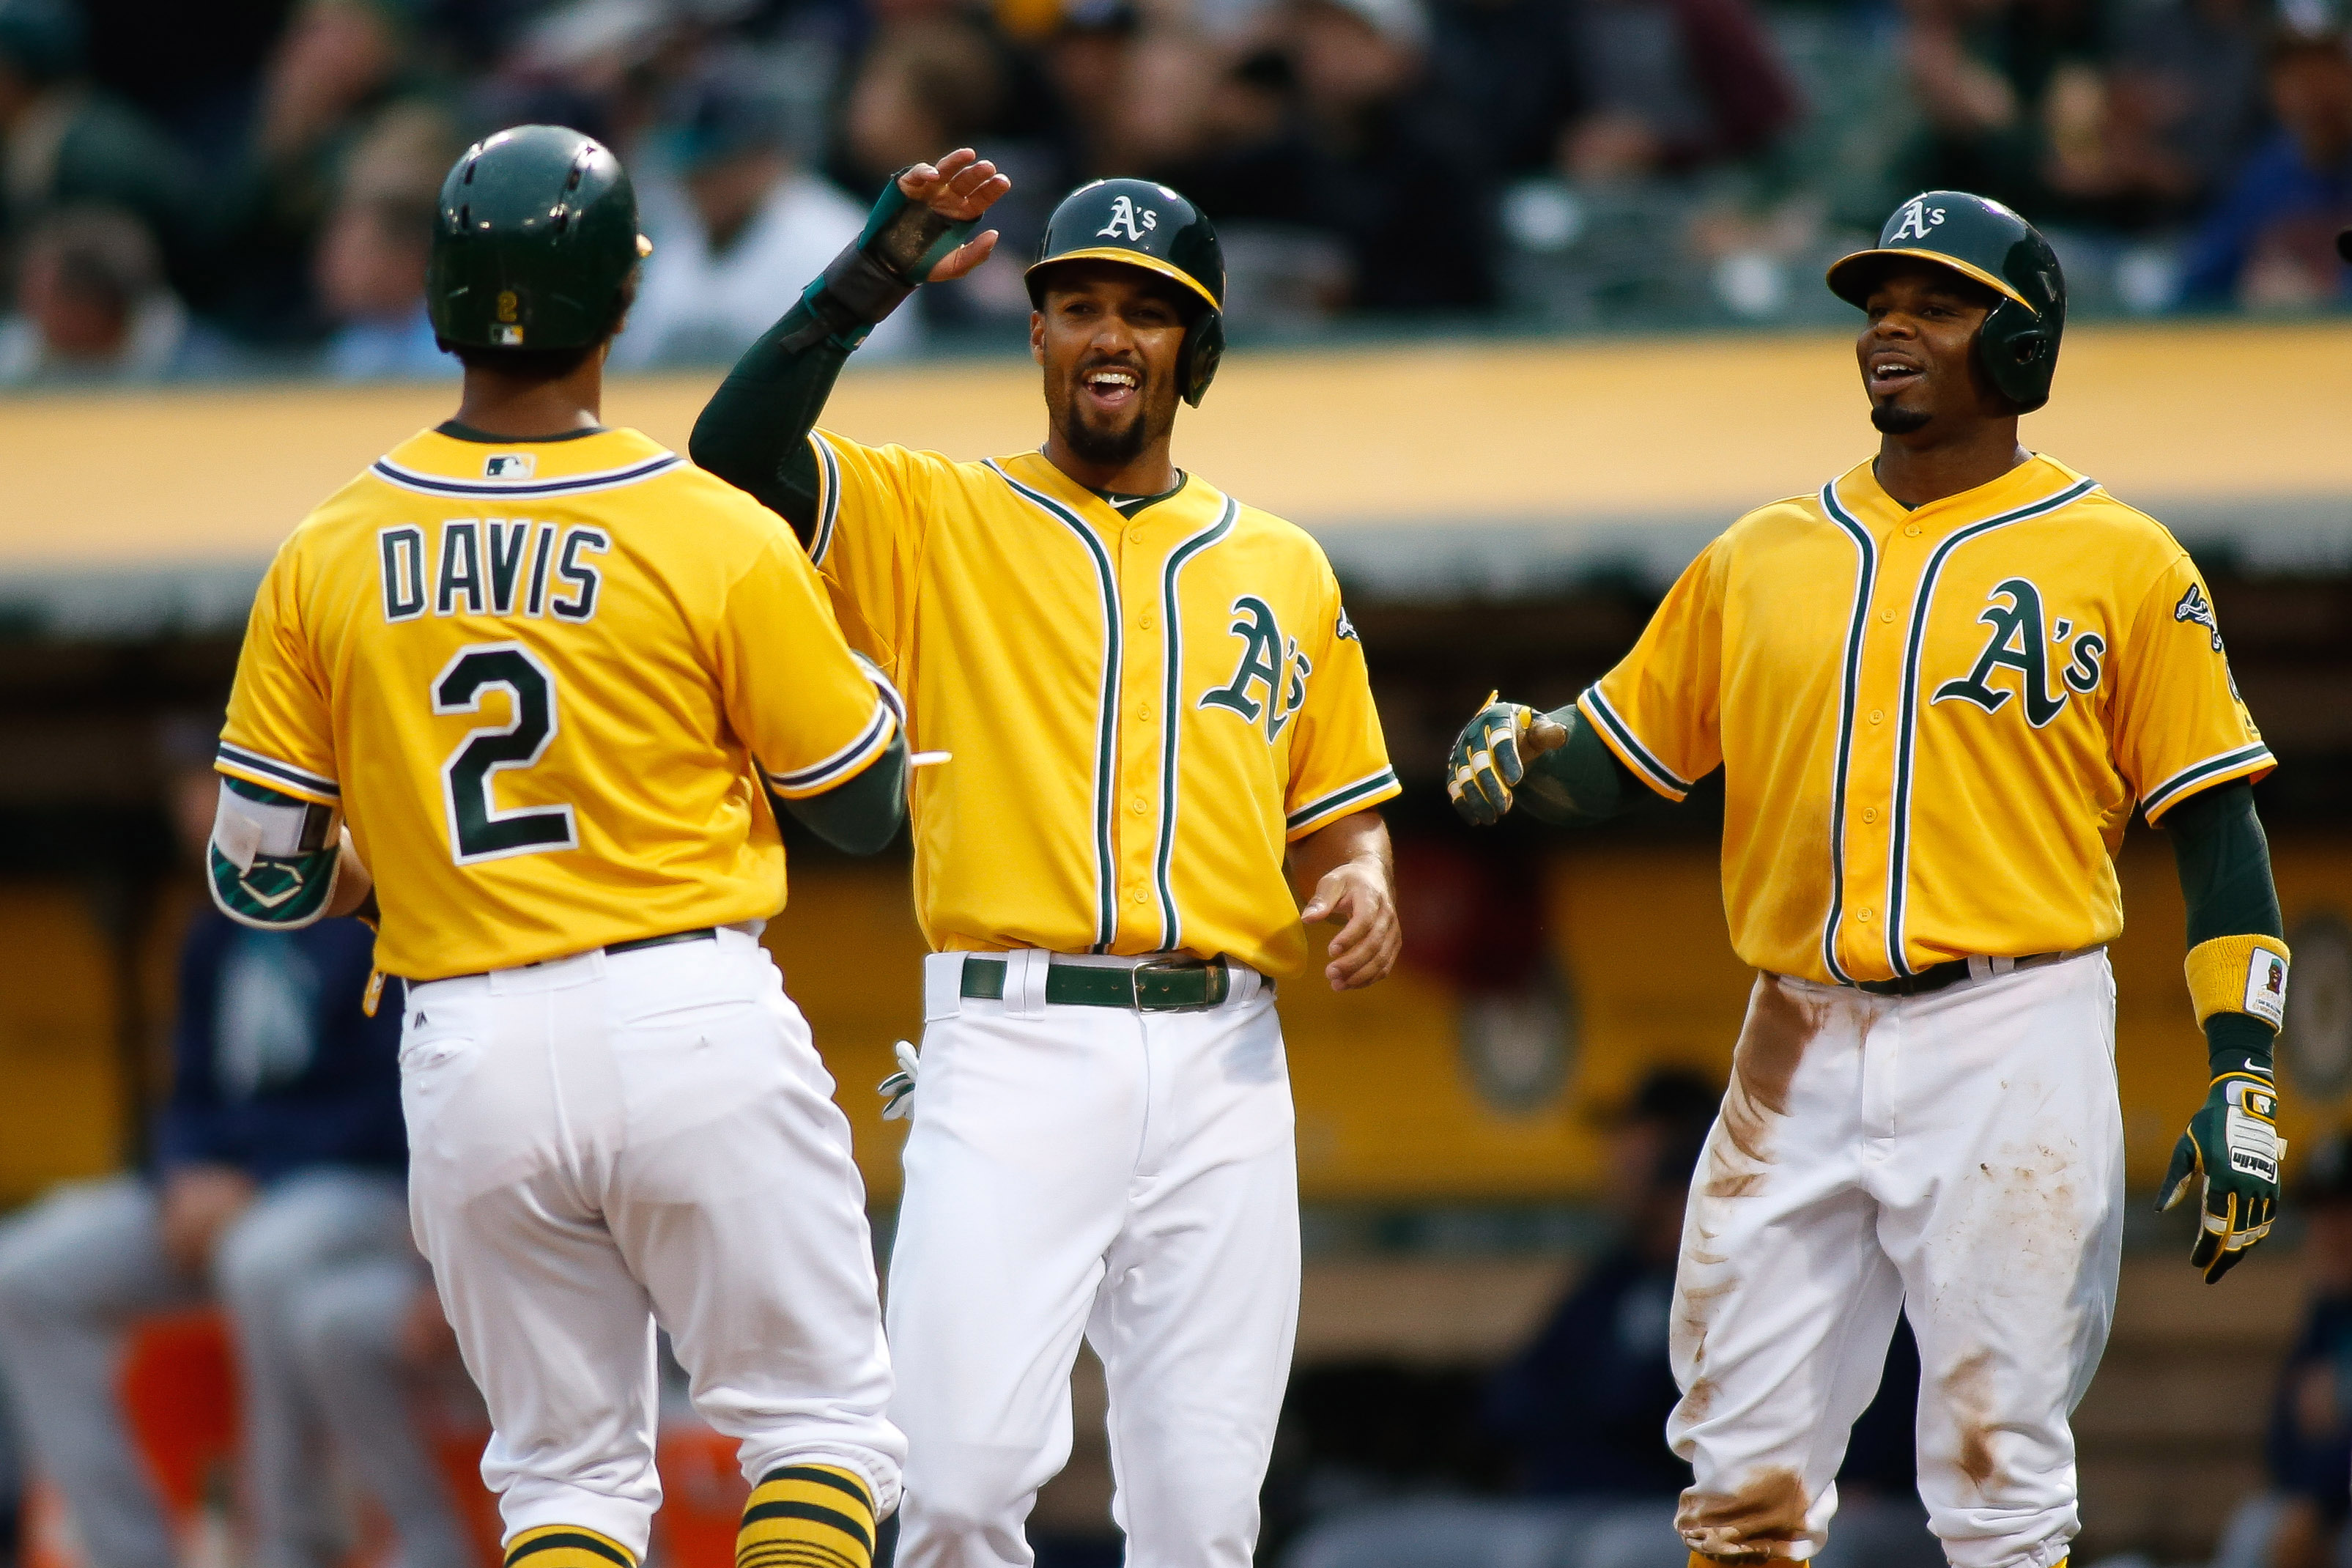 Aug 8, 2017; Oakland, CA, USA; Oakland Athletics left fielder Khris Davis (2) is greeted by shortstop Marcus Semien (10) and center fielder Rajai Davis (11) after hitting a home run against the Seattle Mariners during the first inning at Oakland Coliseum. Mandatory Credit: Stan Szeto-USA TODAY Sports